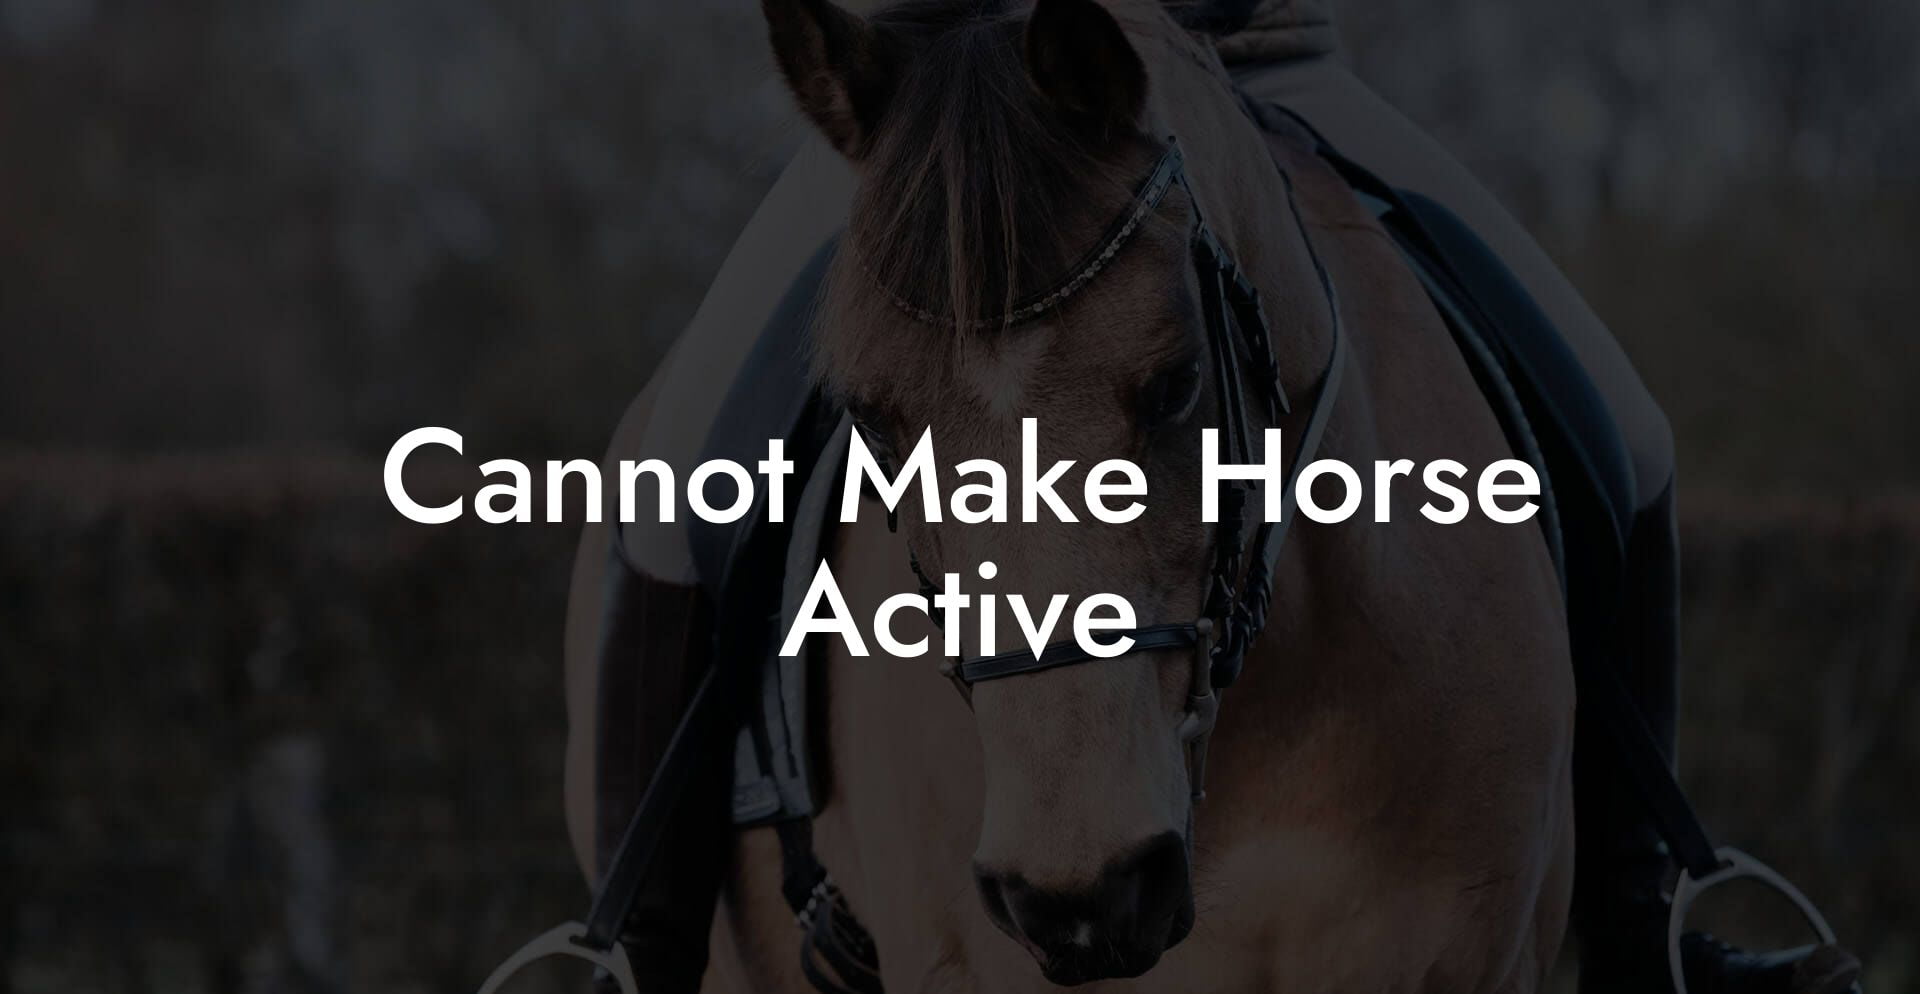 Cannot Make Horse Active